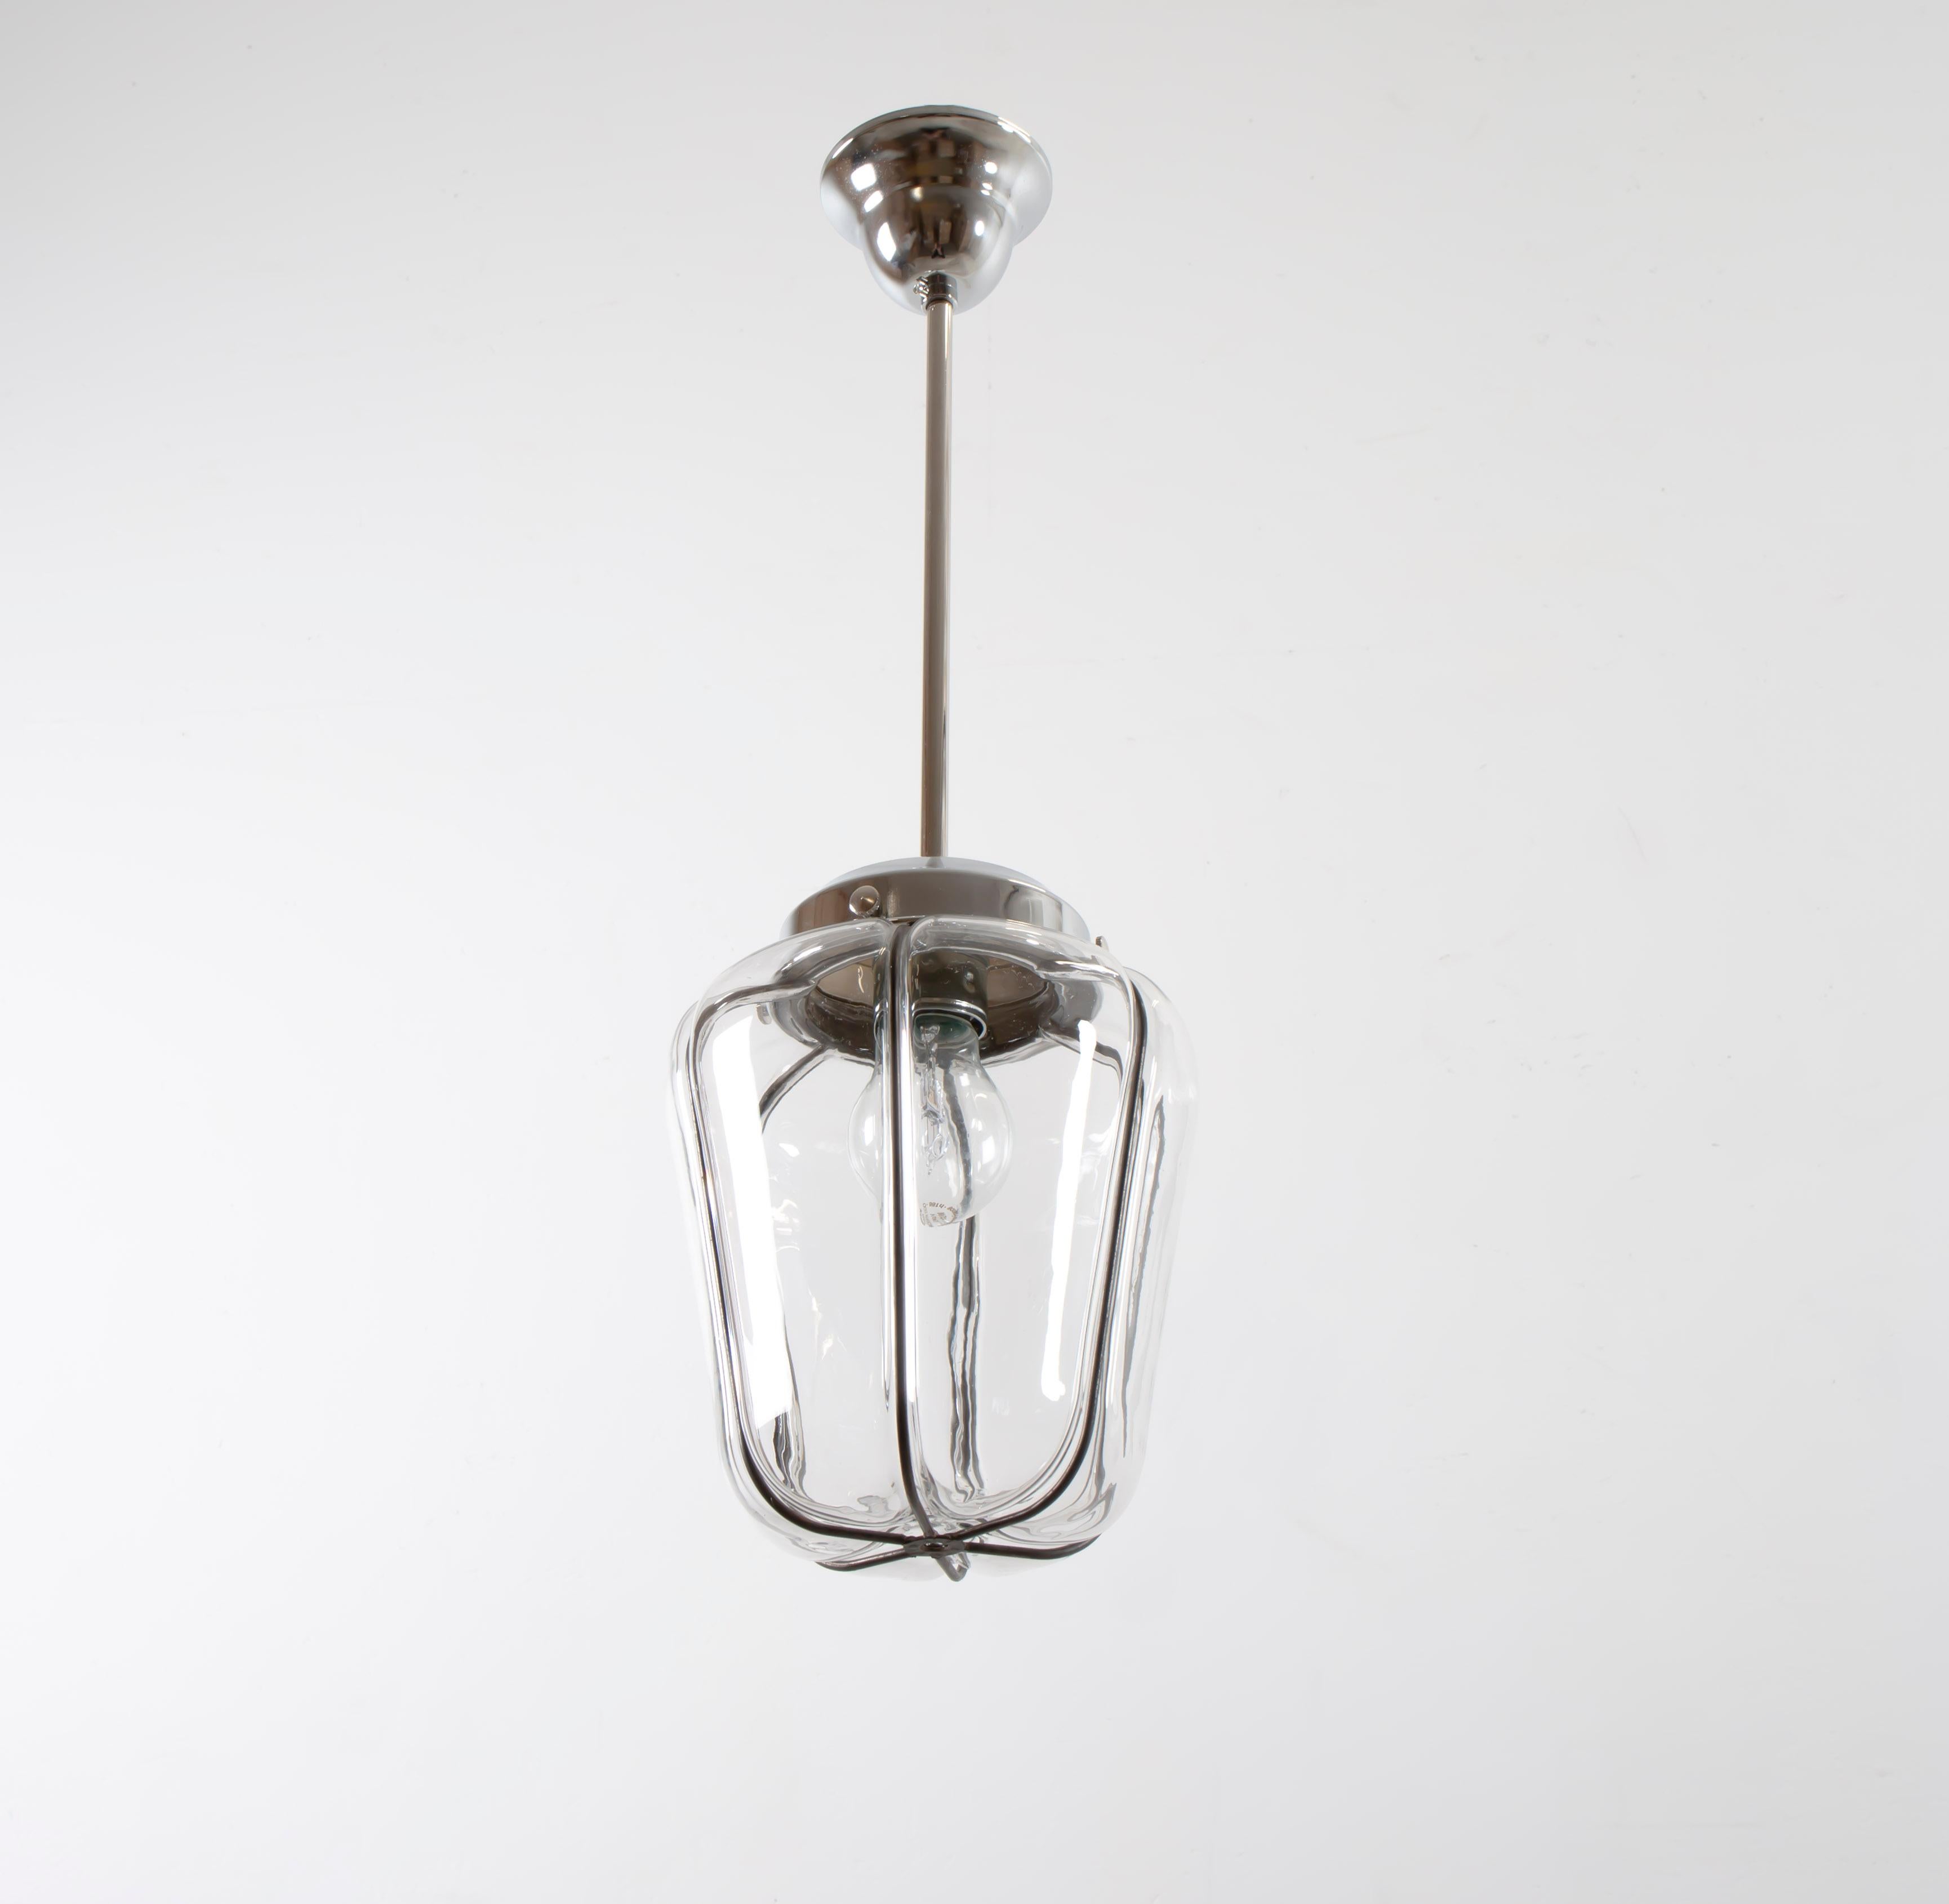 Mid-Century Modern Functionalist Ceiling Light, Norway, 1950s For Sale